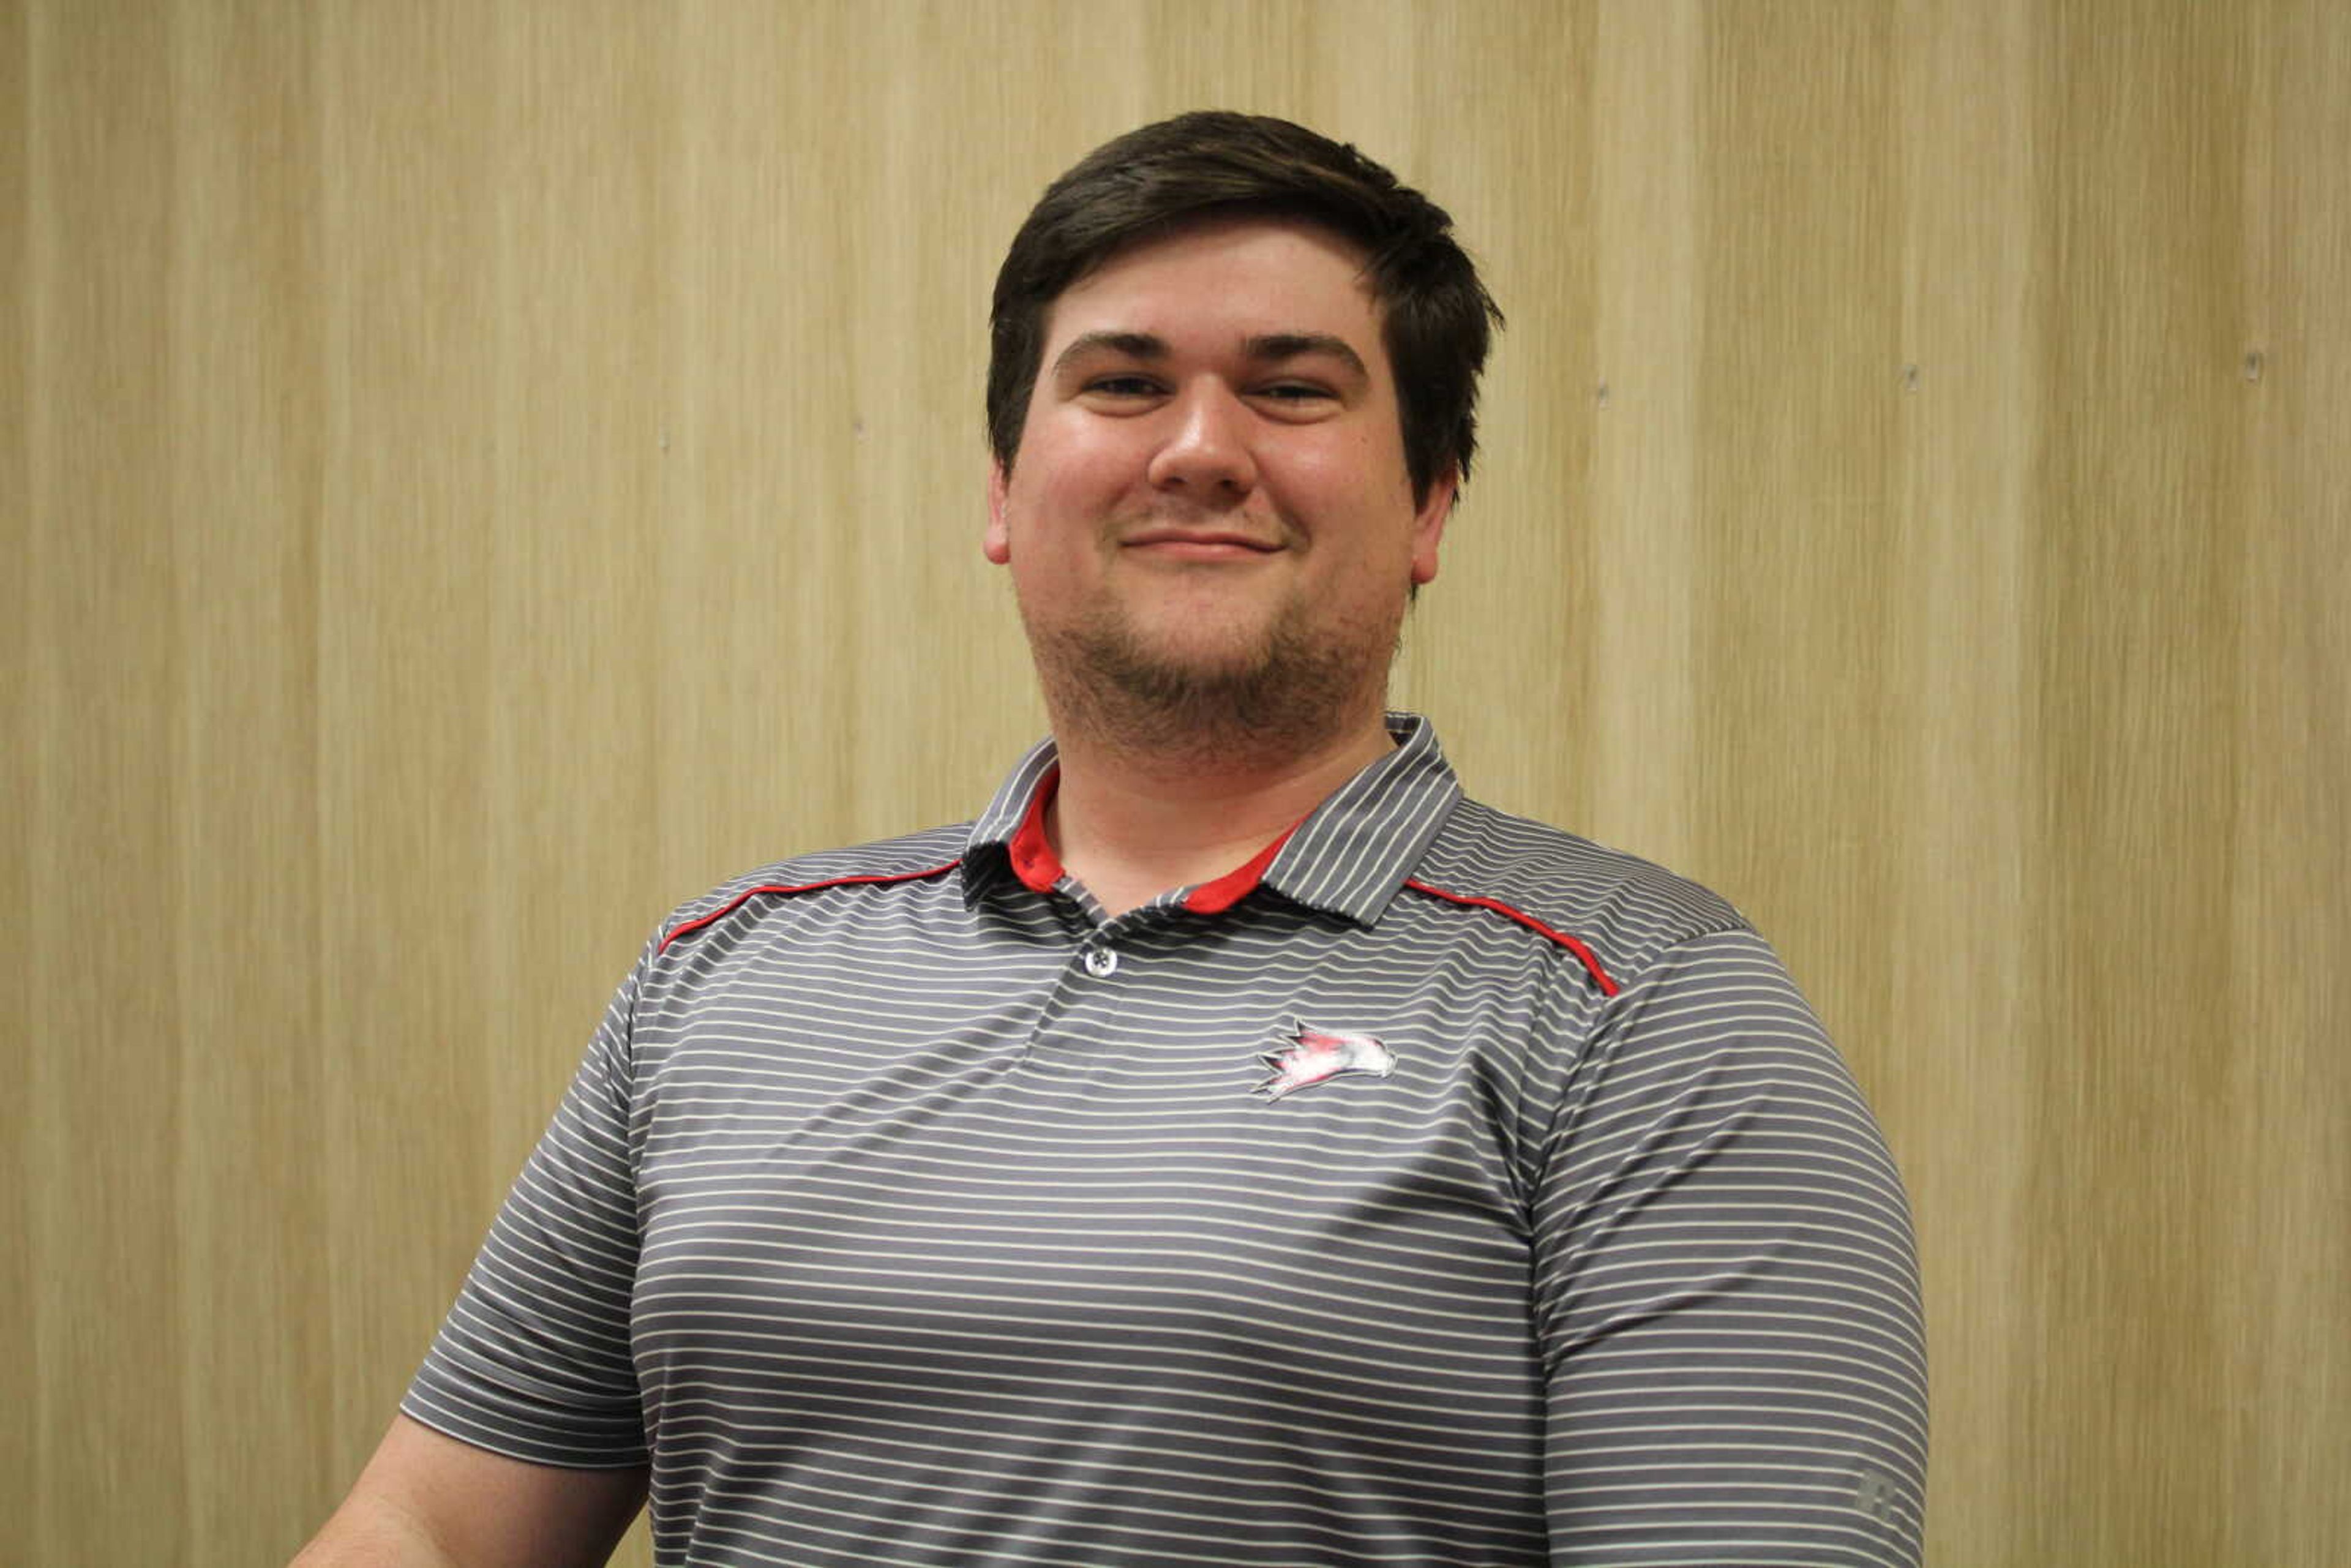 Junior emergency preparedness major Harry Meyer will serve as the student body president for the 2023-24 school year. Meyer is excited to serve and said he brings a unique perspective to SGA because he has recently taken more responsibility within SGA.